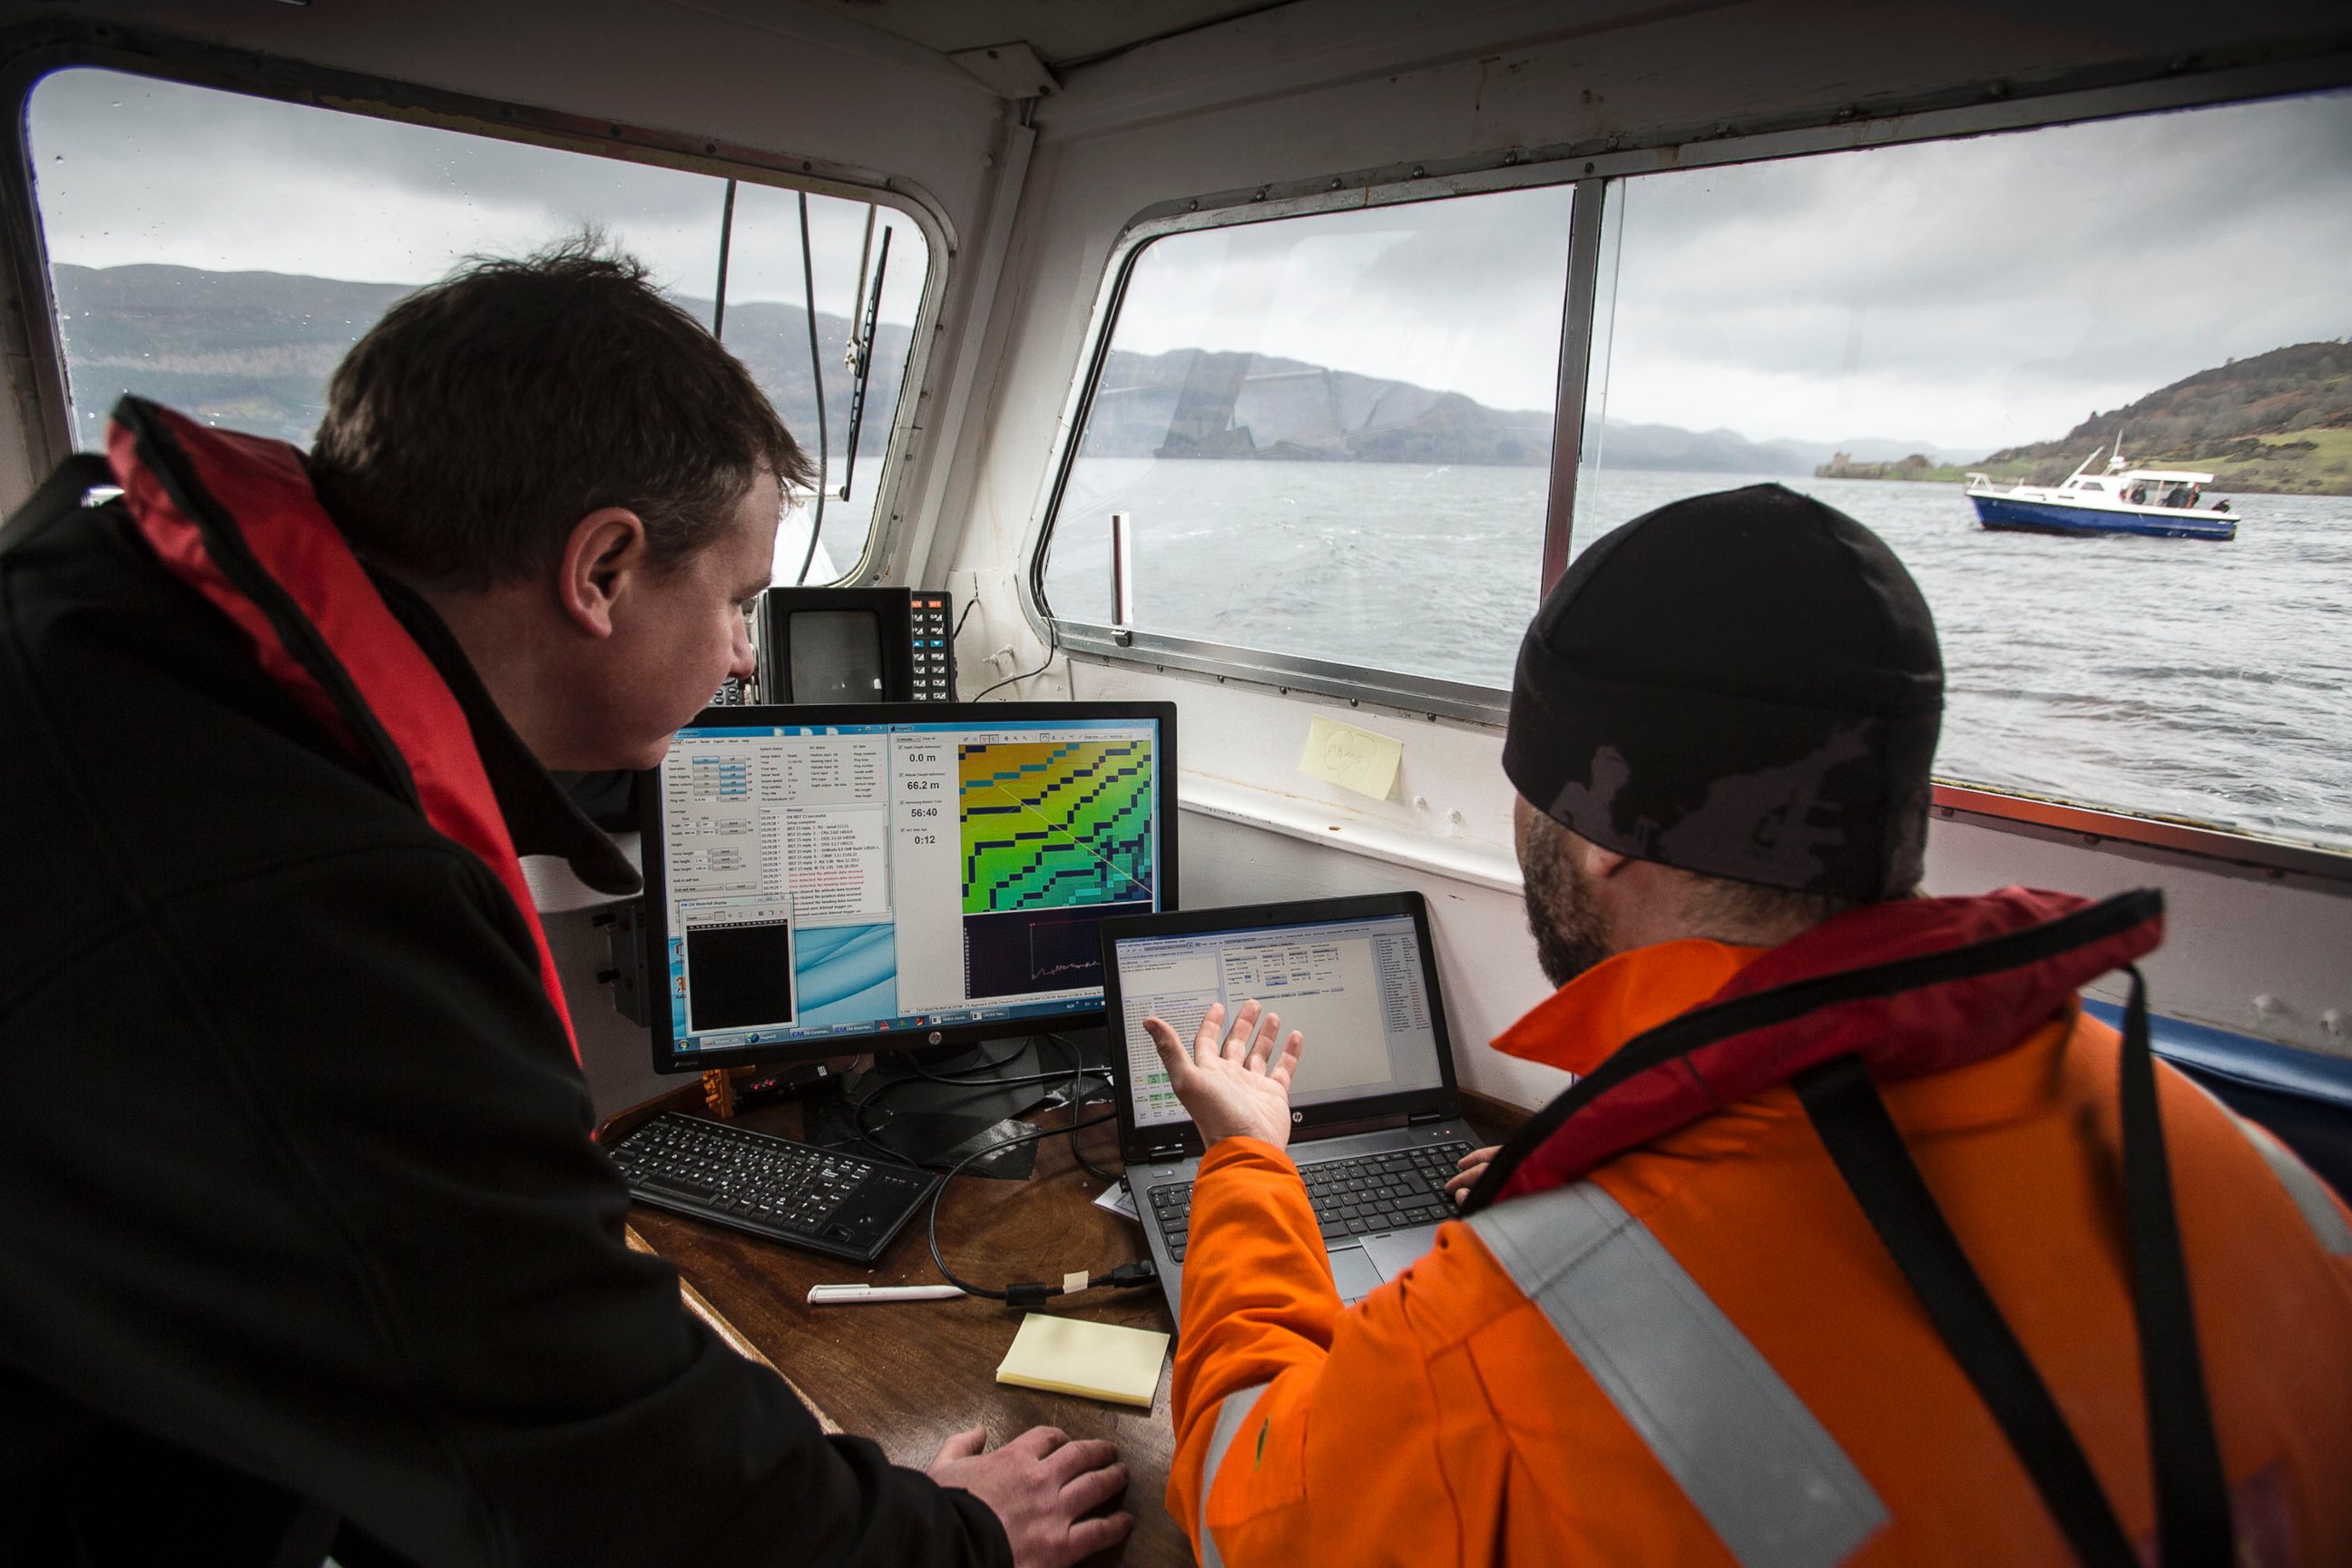 PHOTO: Scientists and experts with The Loch Ness Project working on underwater surveying.